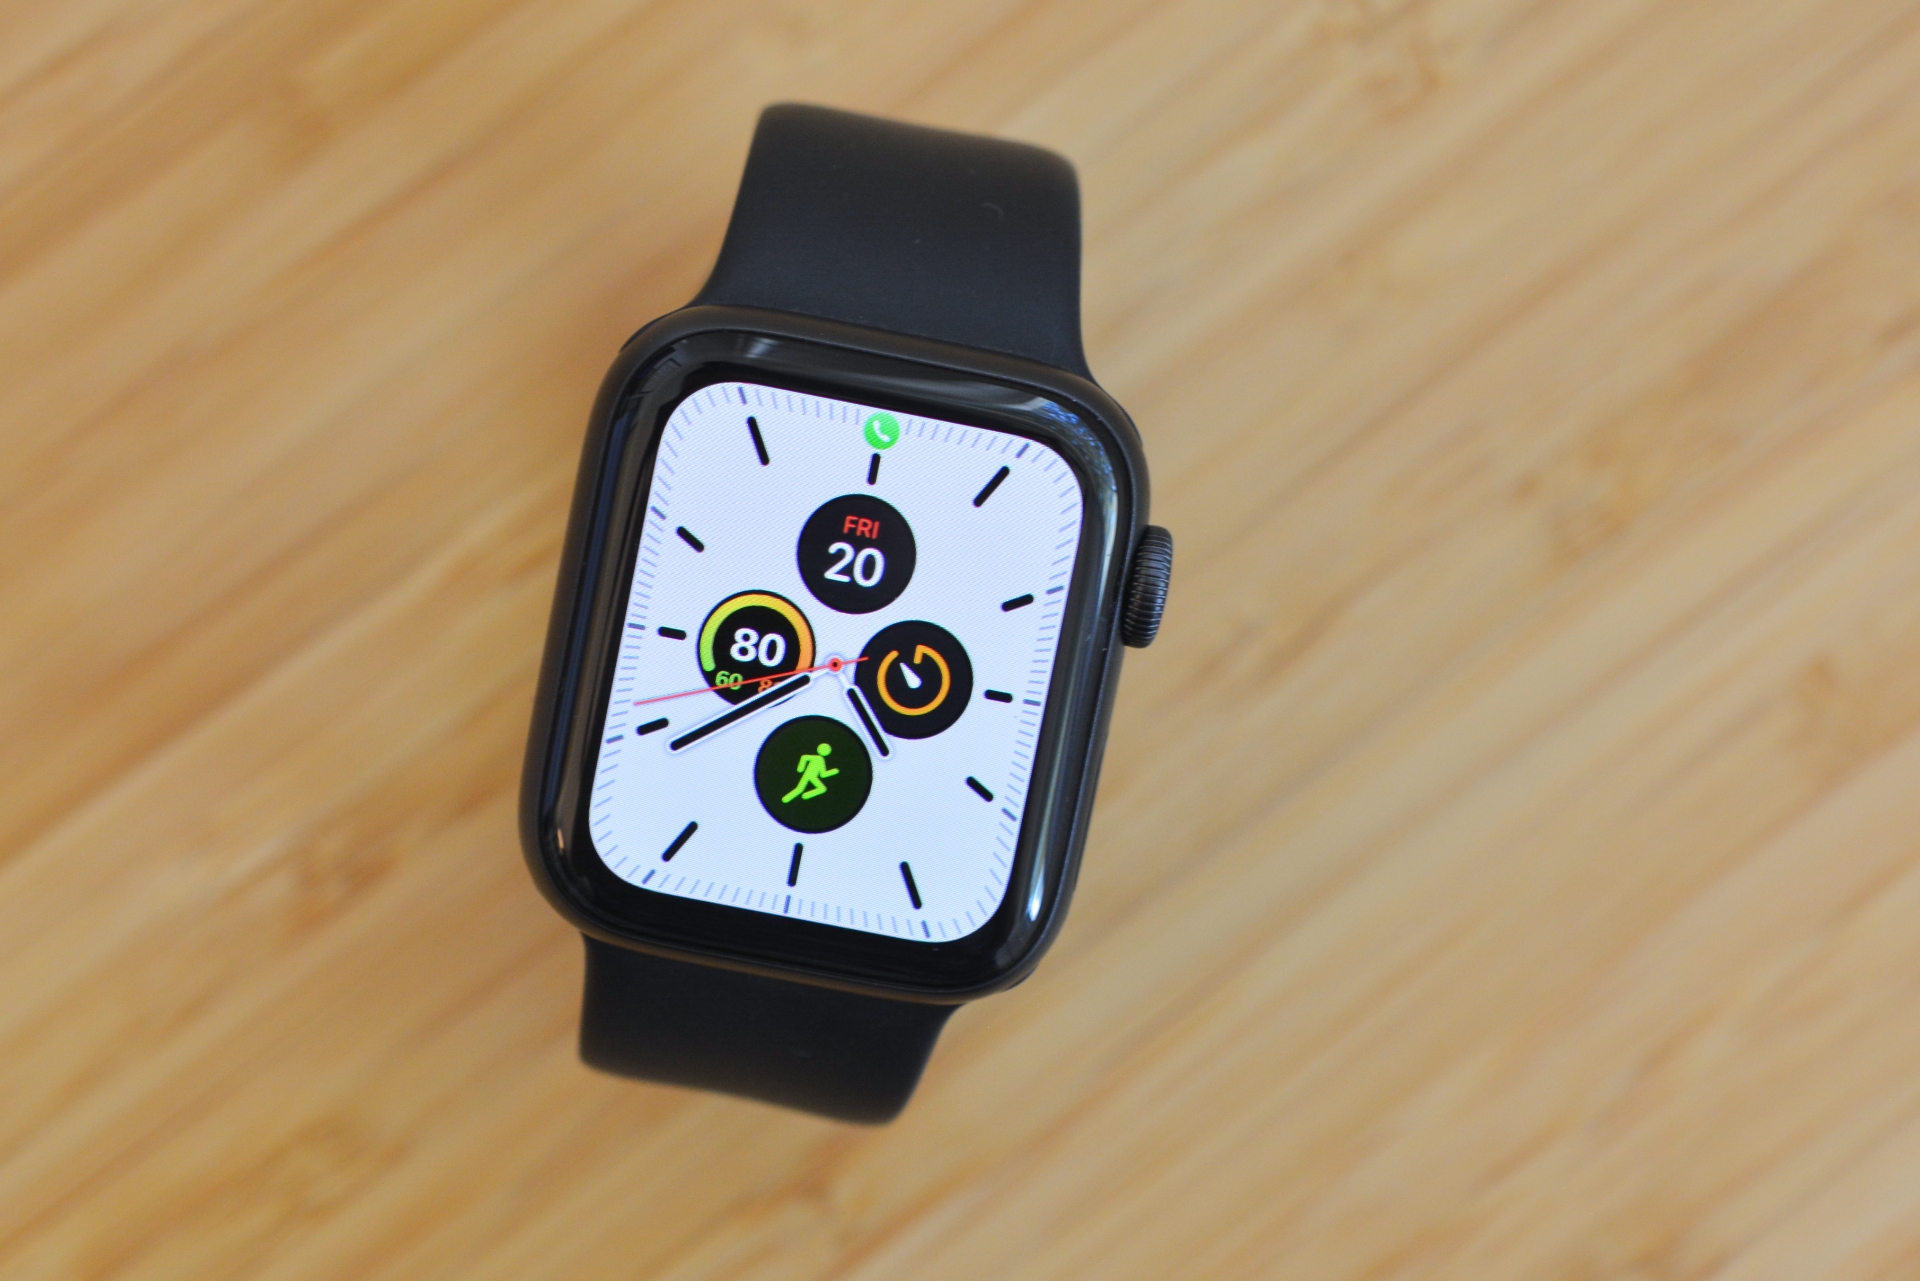 Apple Watch deal discounts Series 5 to lowest price ever on Amazon | Ars Technica